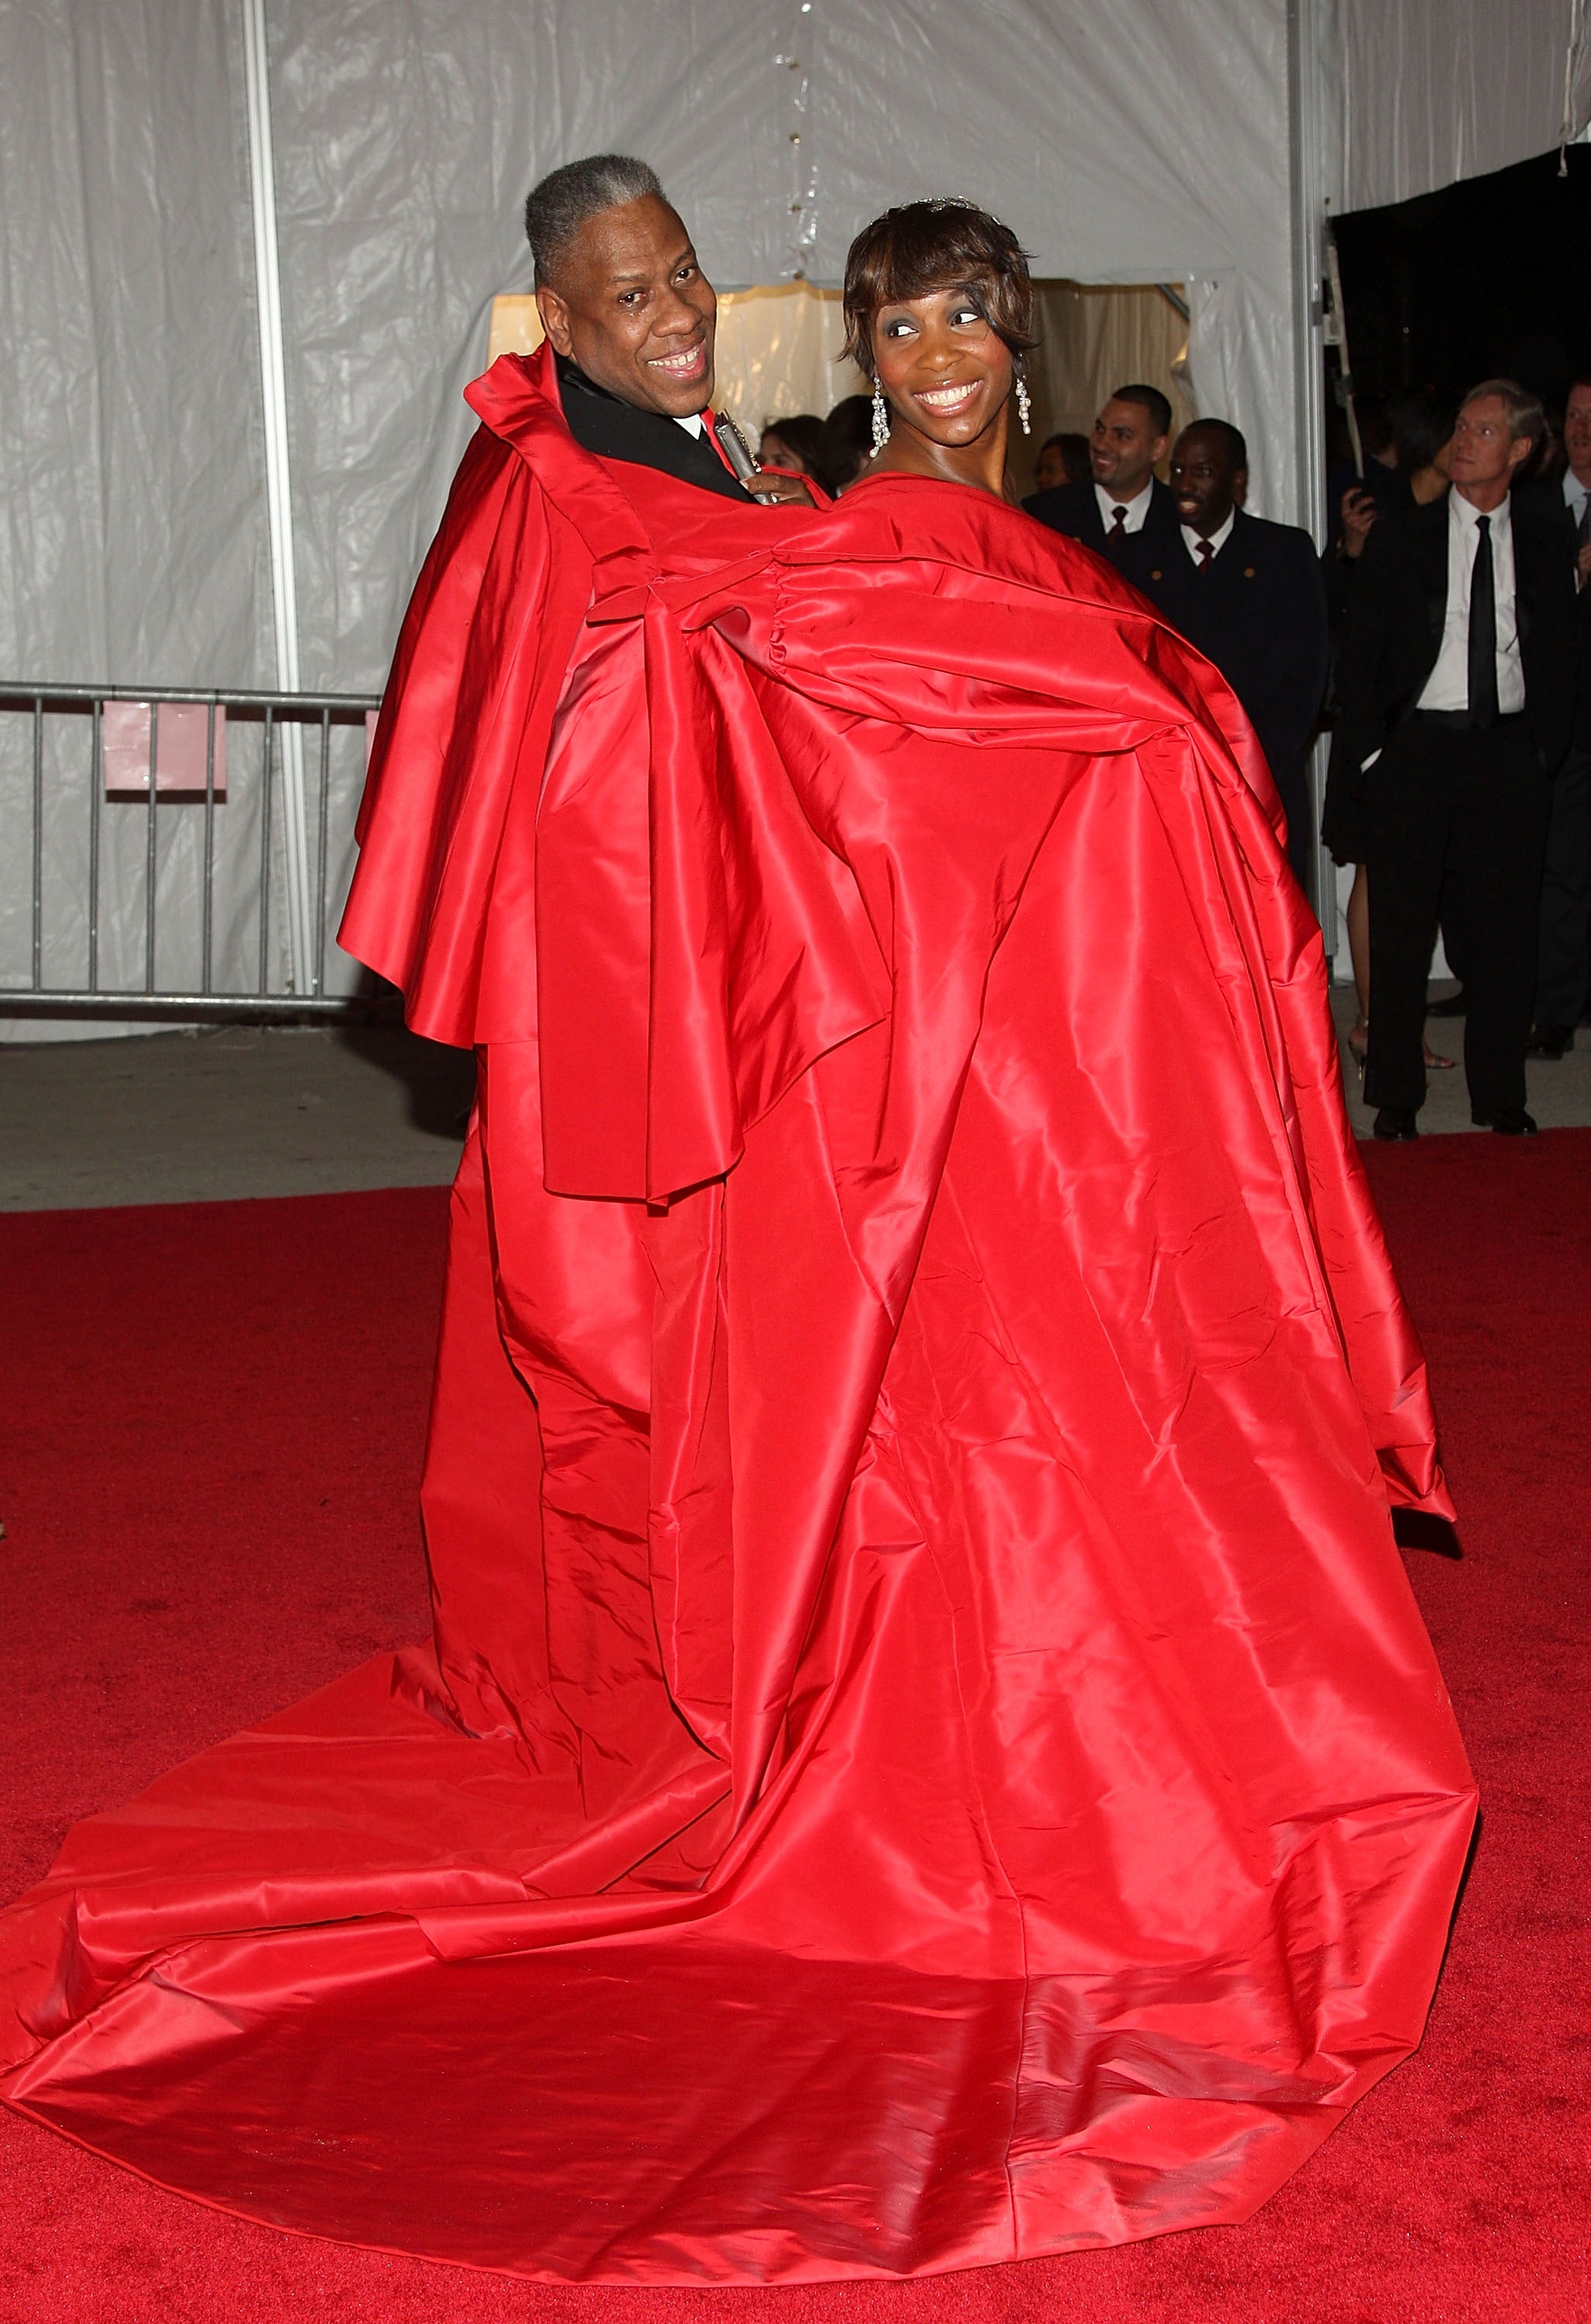 Andre Leon Talley arriving at the Costume Institute Gala, held at